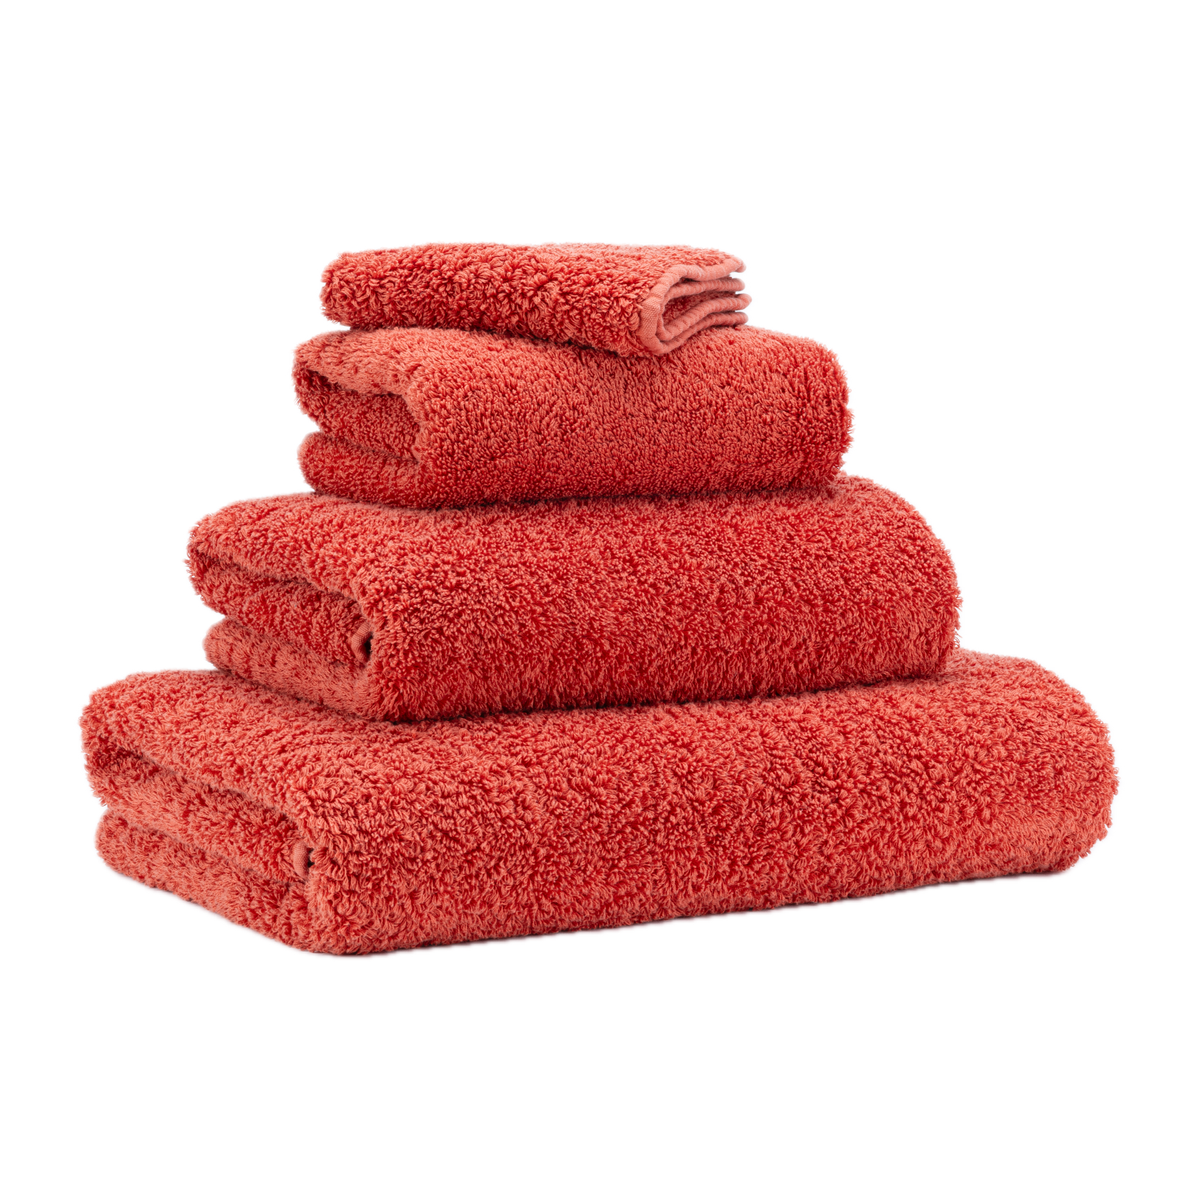 Abyss Super Pile Bath Towels Chili Stack Slanted